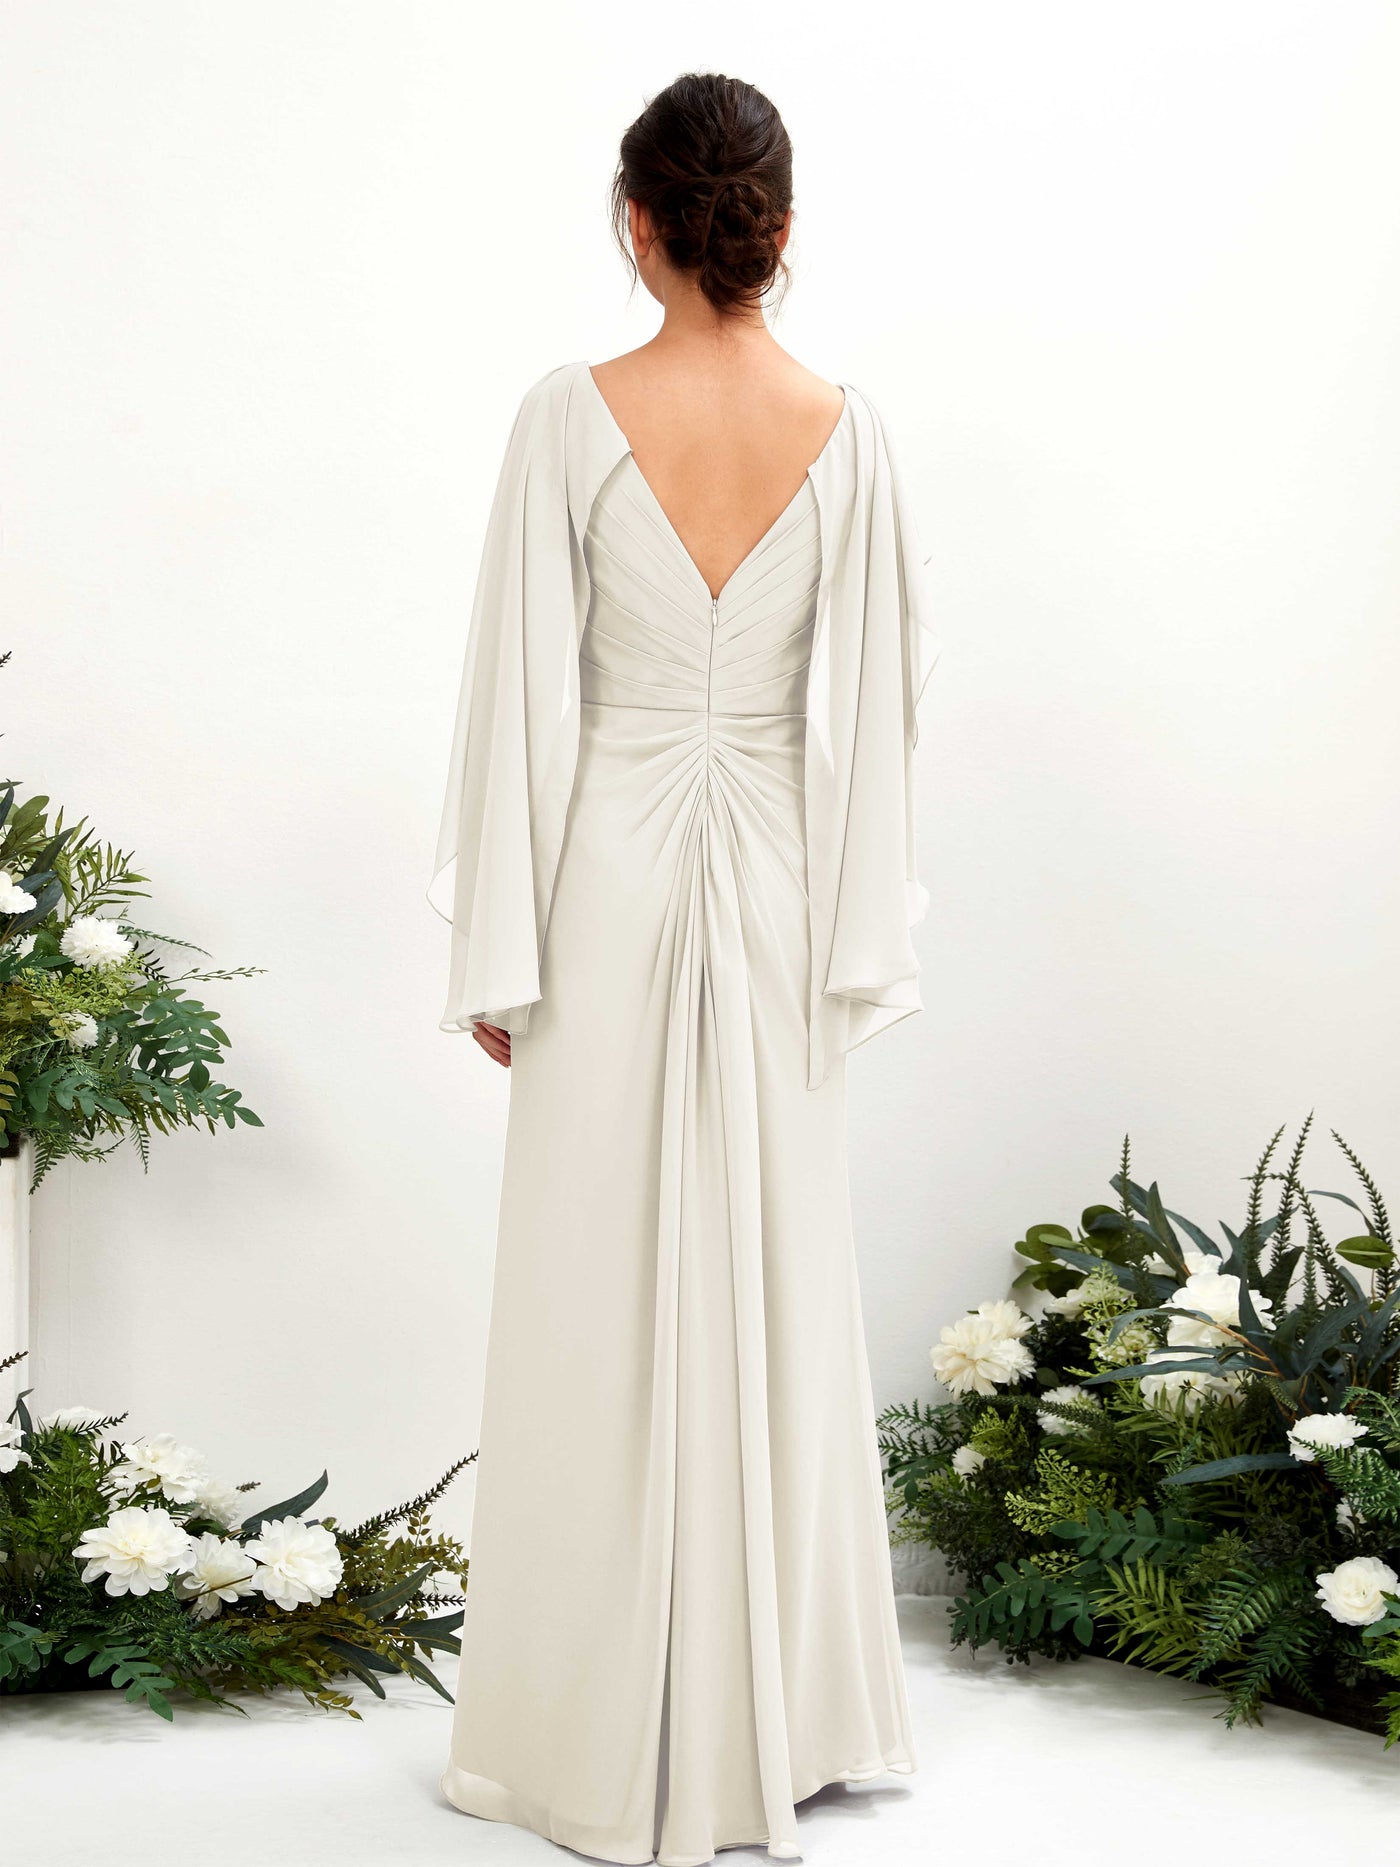 Ivory Bridesmaid Dresses Bridesmaid Dress A-line Chiffon Straps Full Length Long Sleeves Wedding Party Dress (80220126)#color_ivory